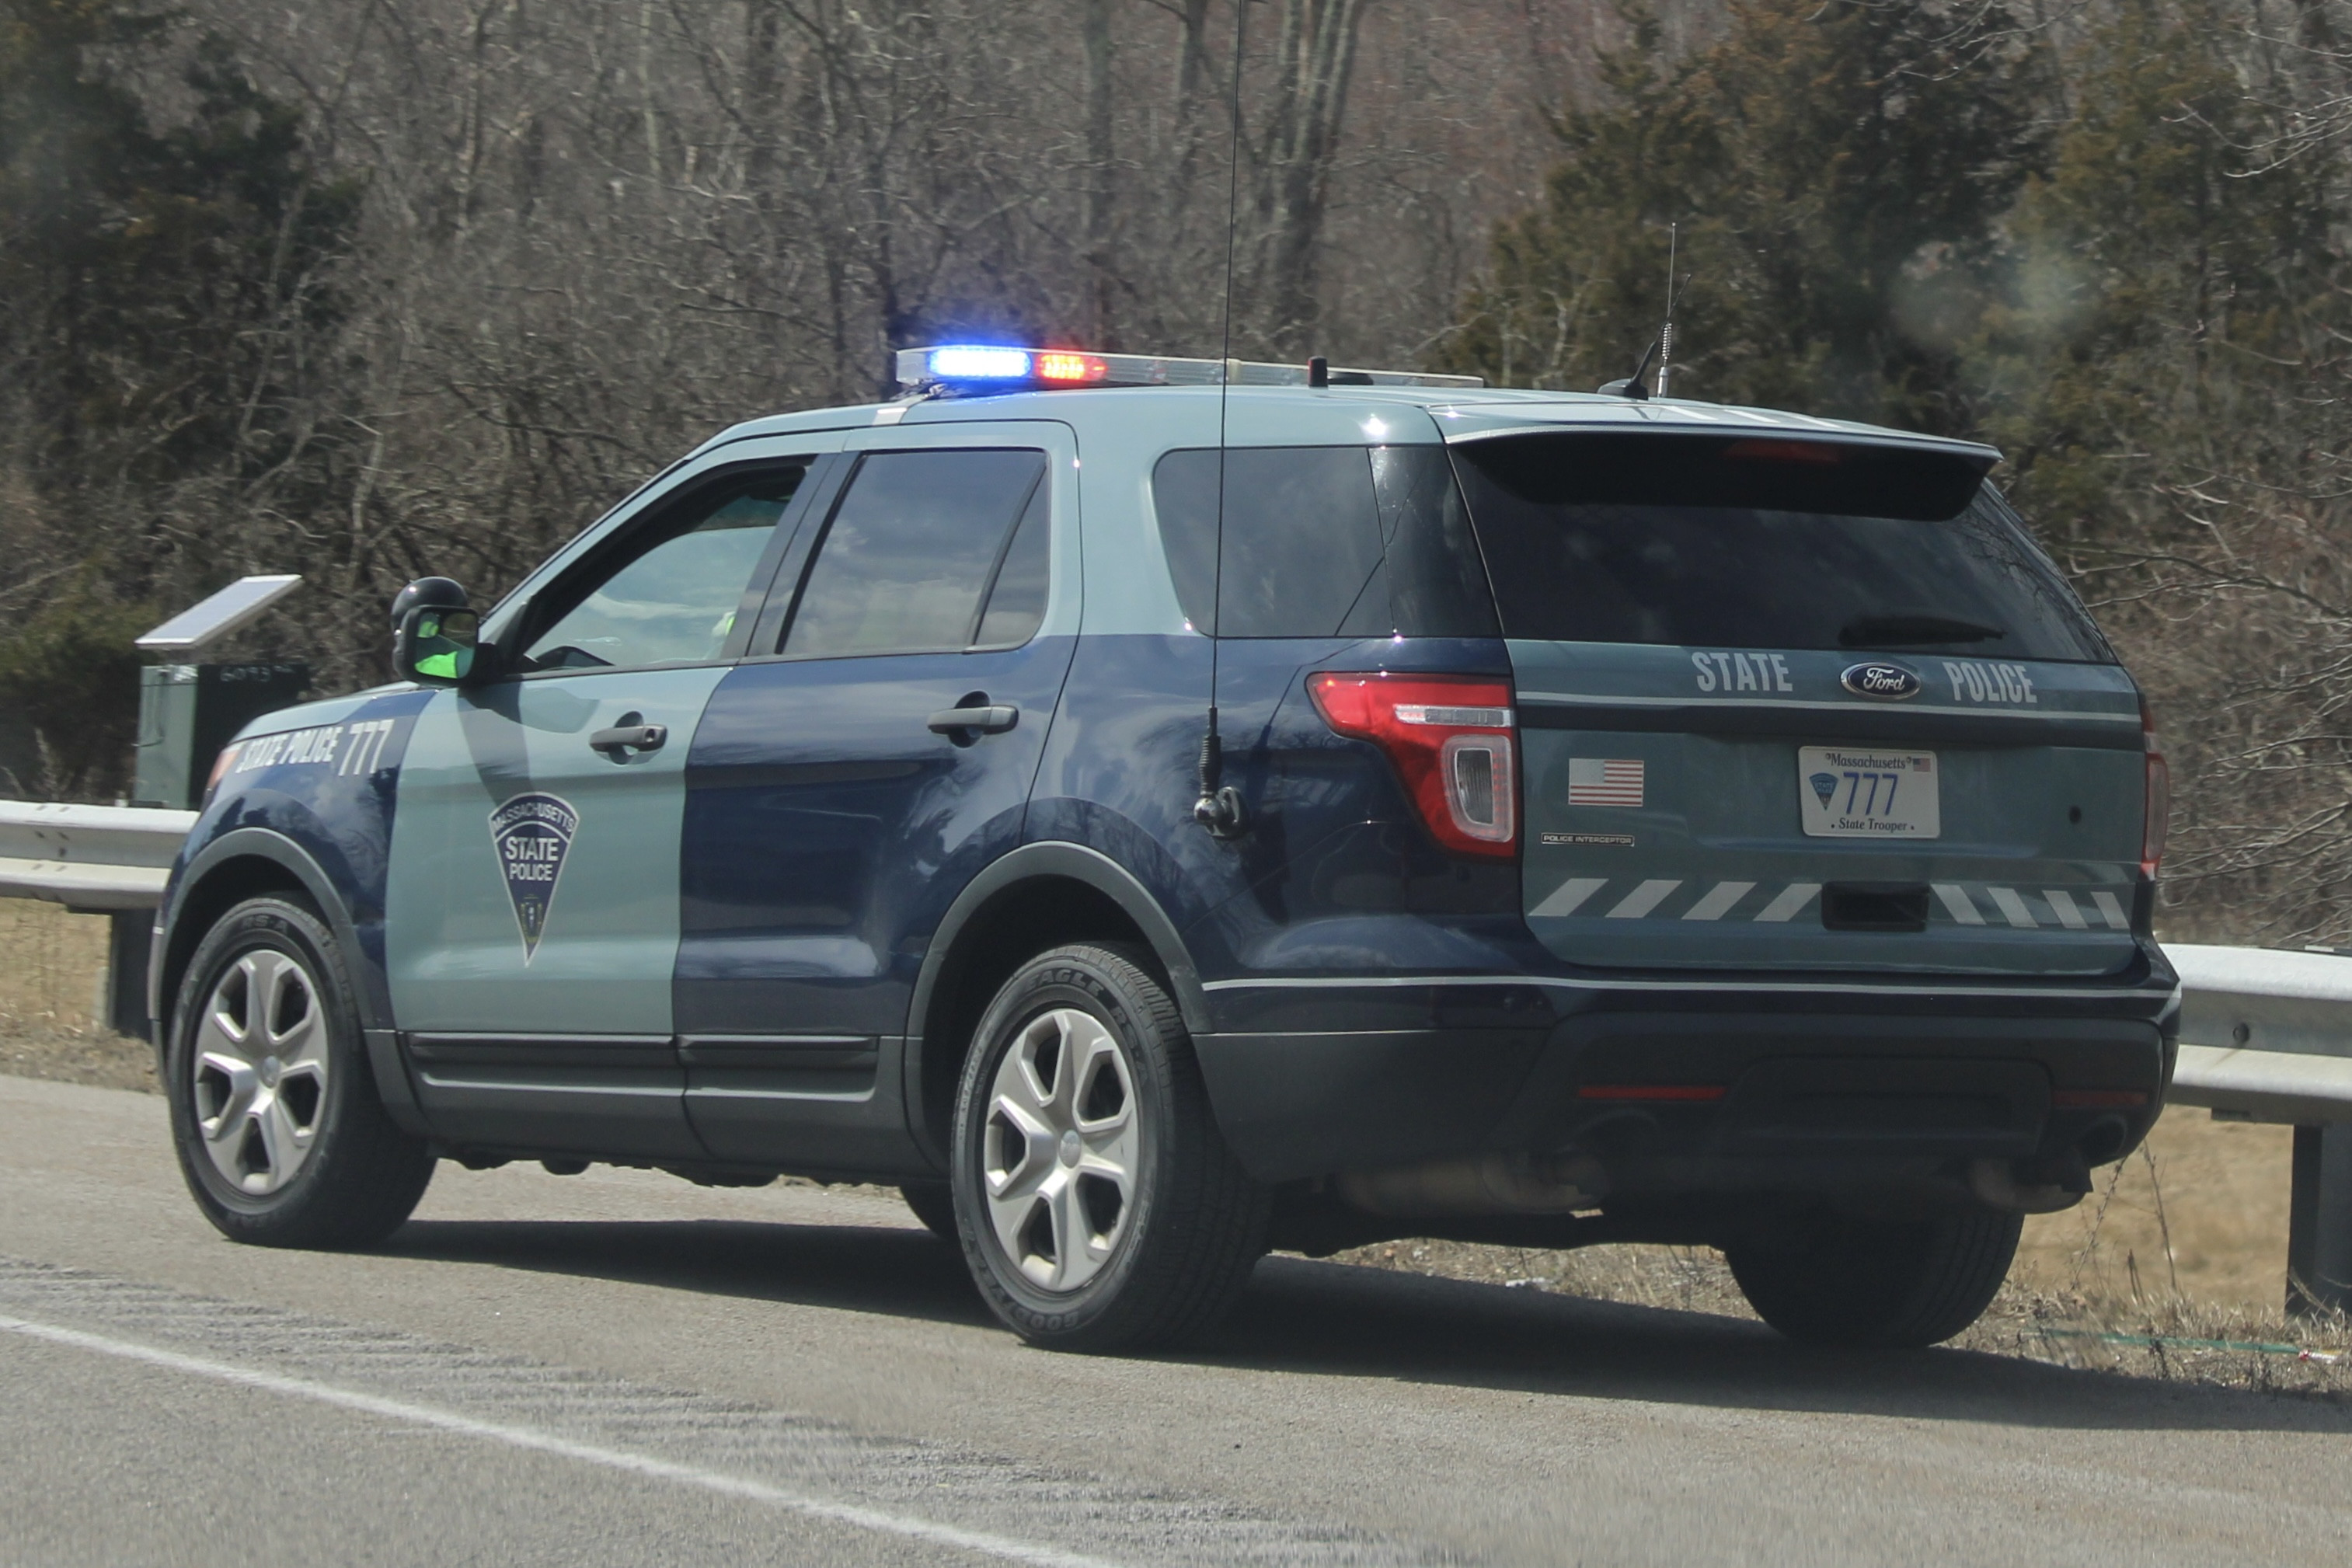 A photo  of Massachusetts State Police
            Cruiser 777, a 2015 Ford Police Interceptor Utility             taken by @riemergencyvehicles